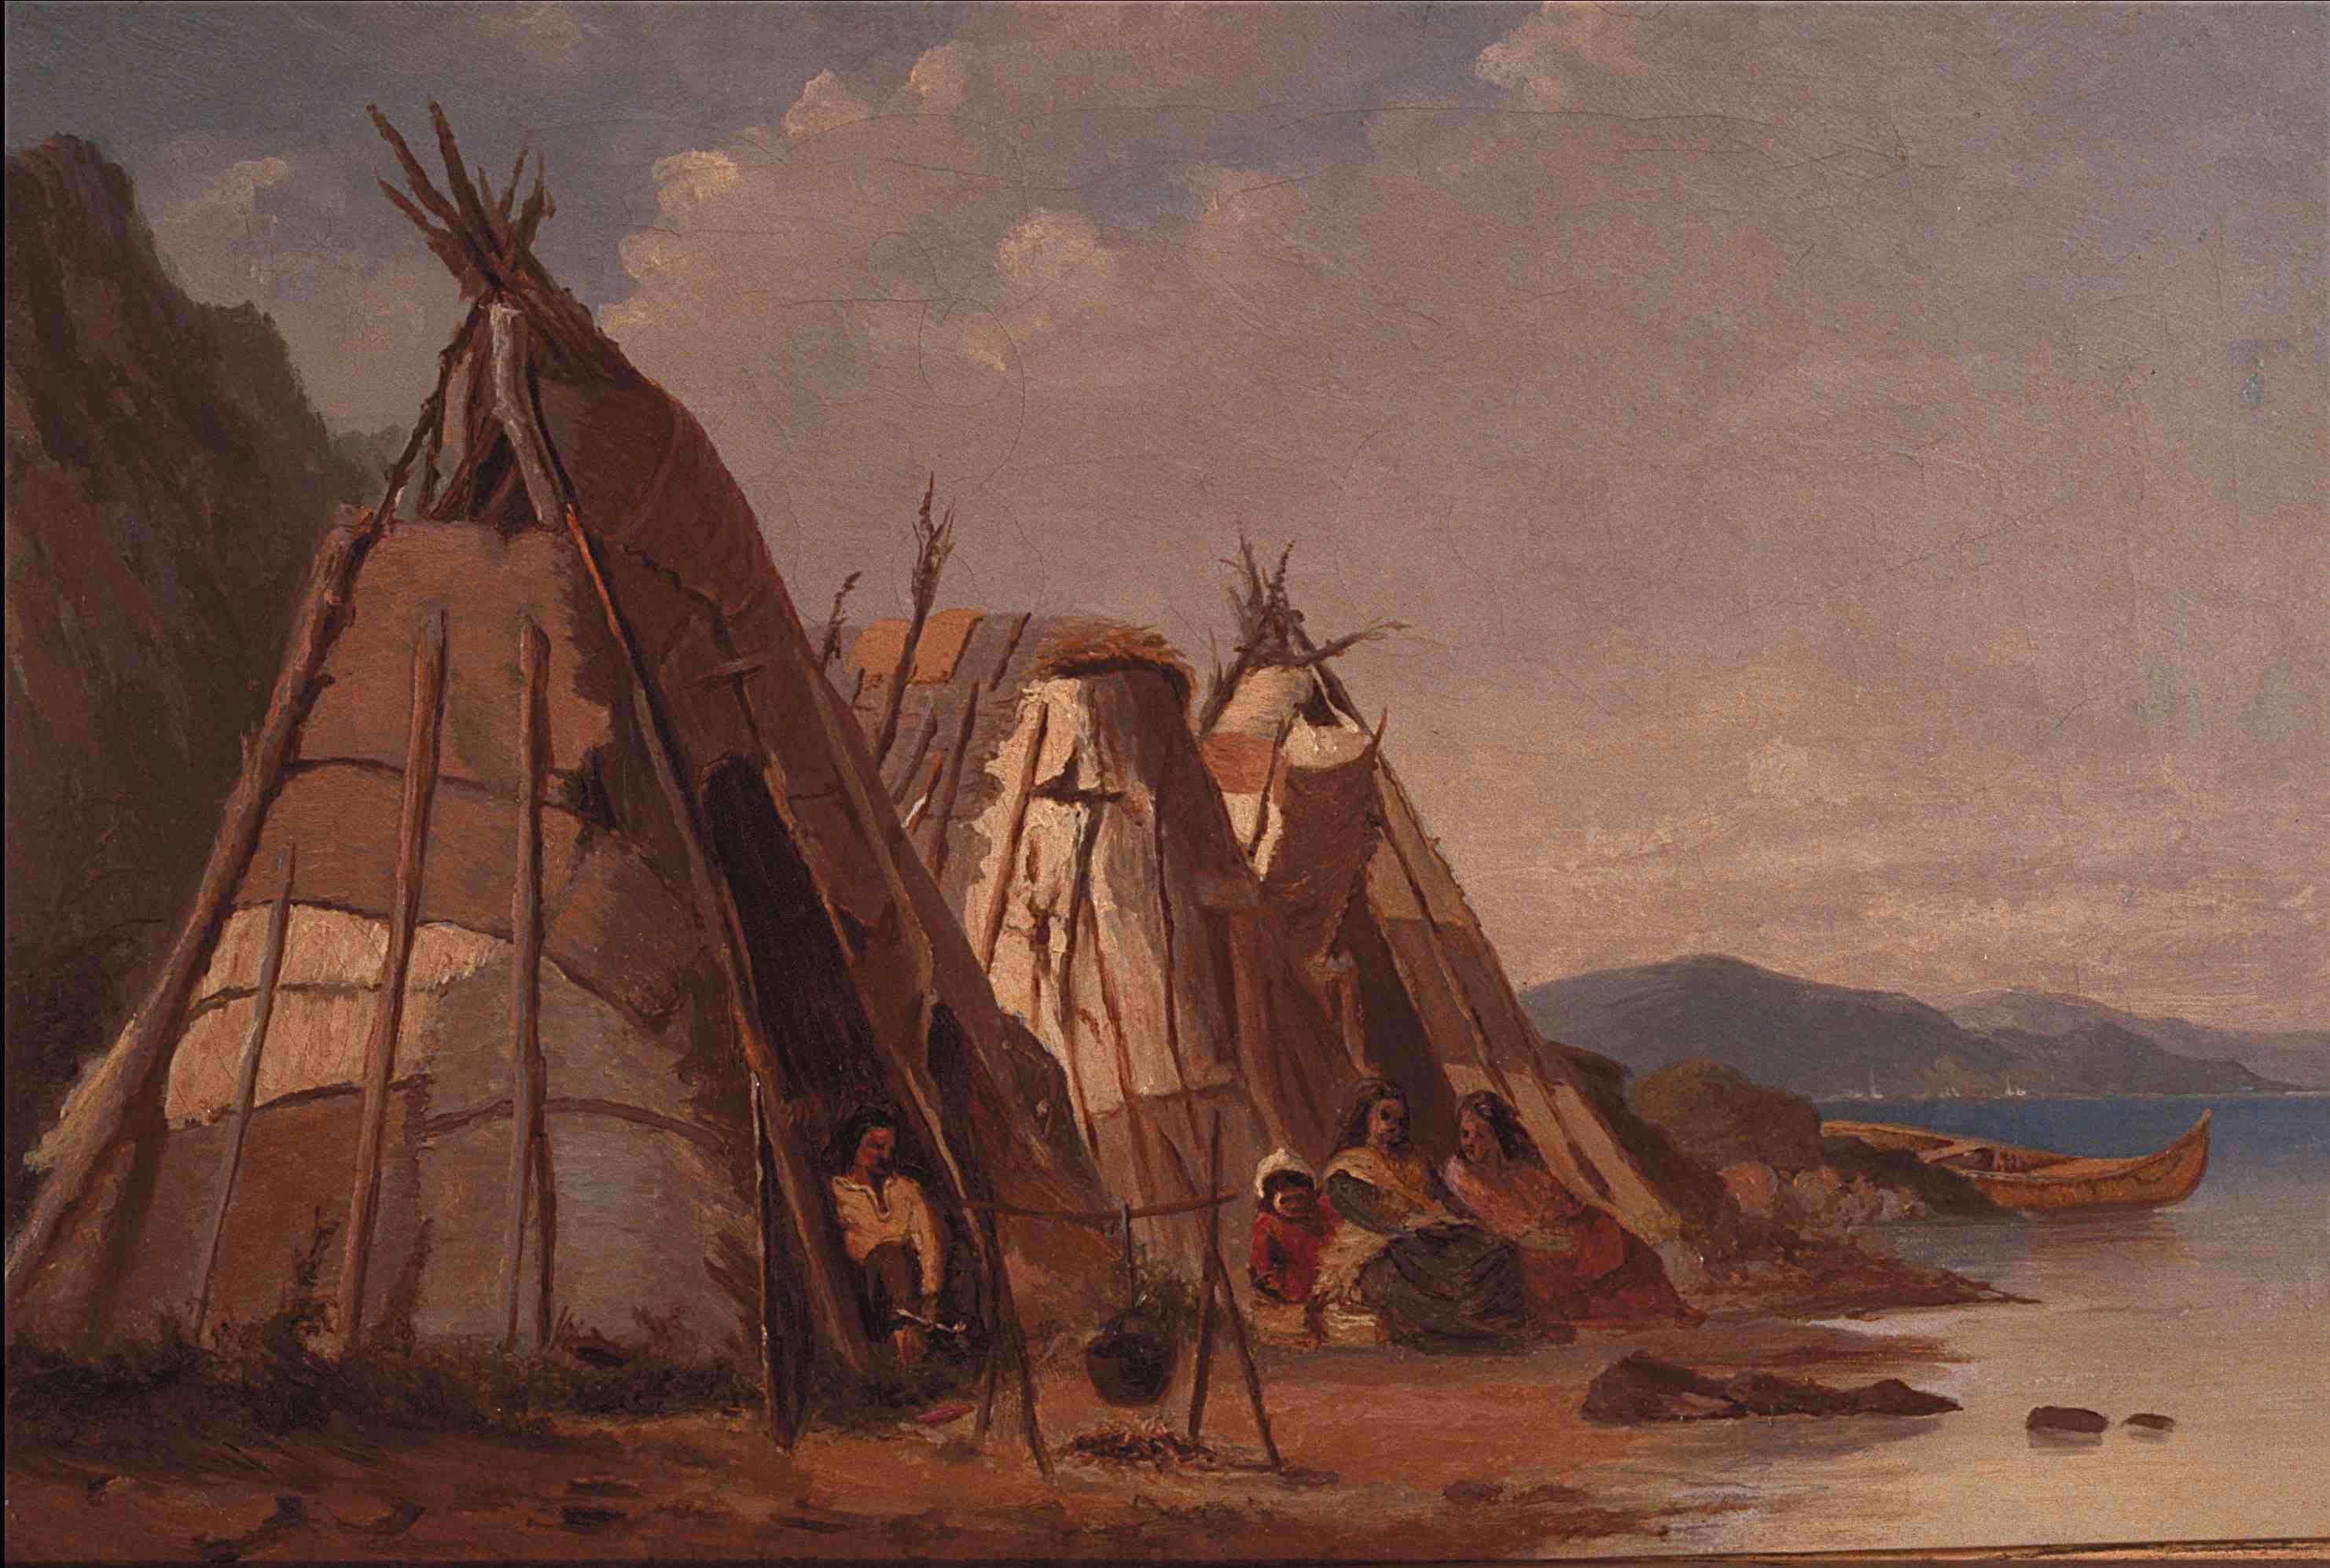 Painting of Aboriginal families in front of wigwams on a beach.